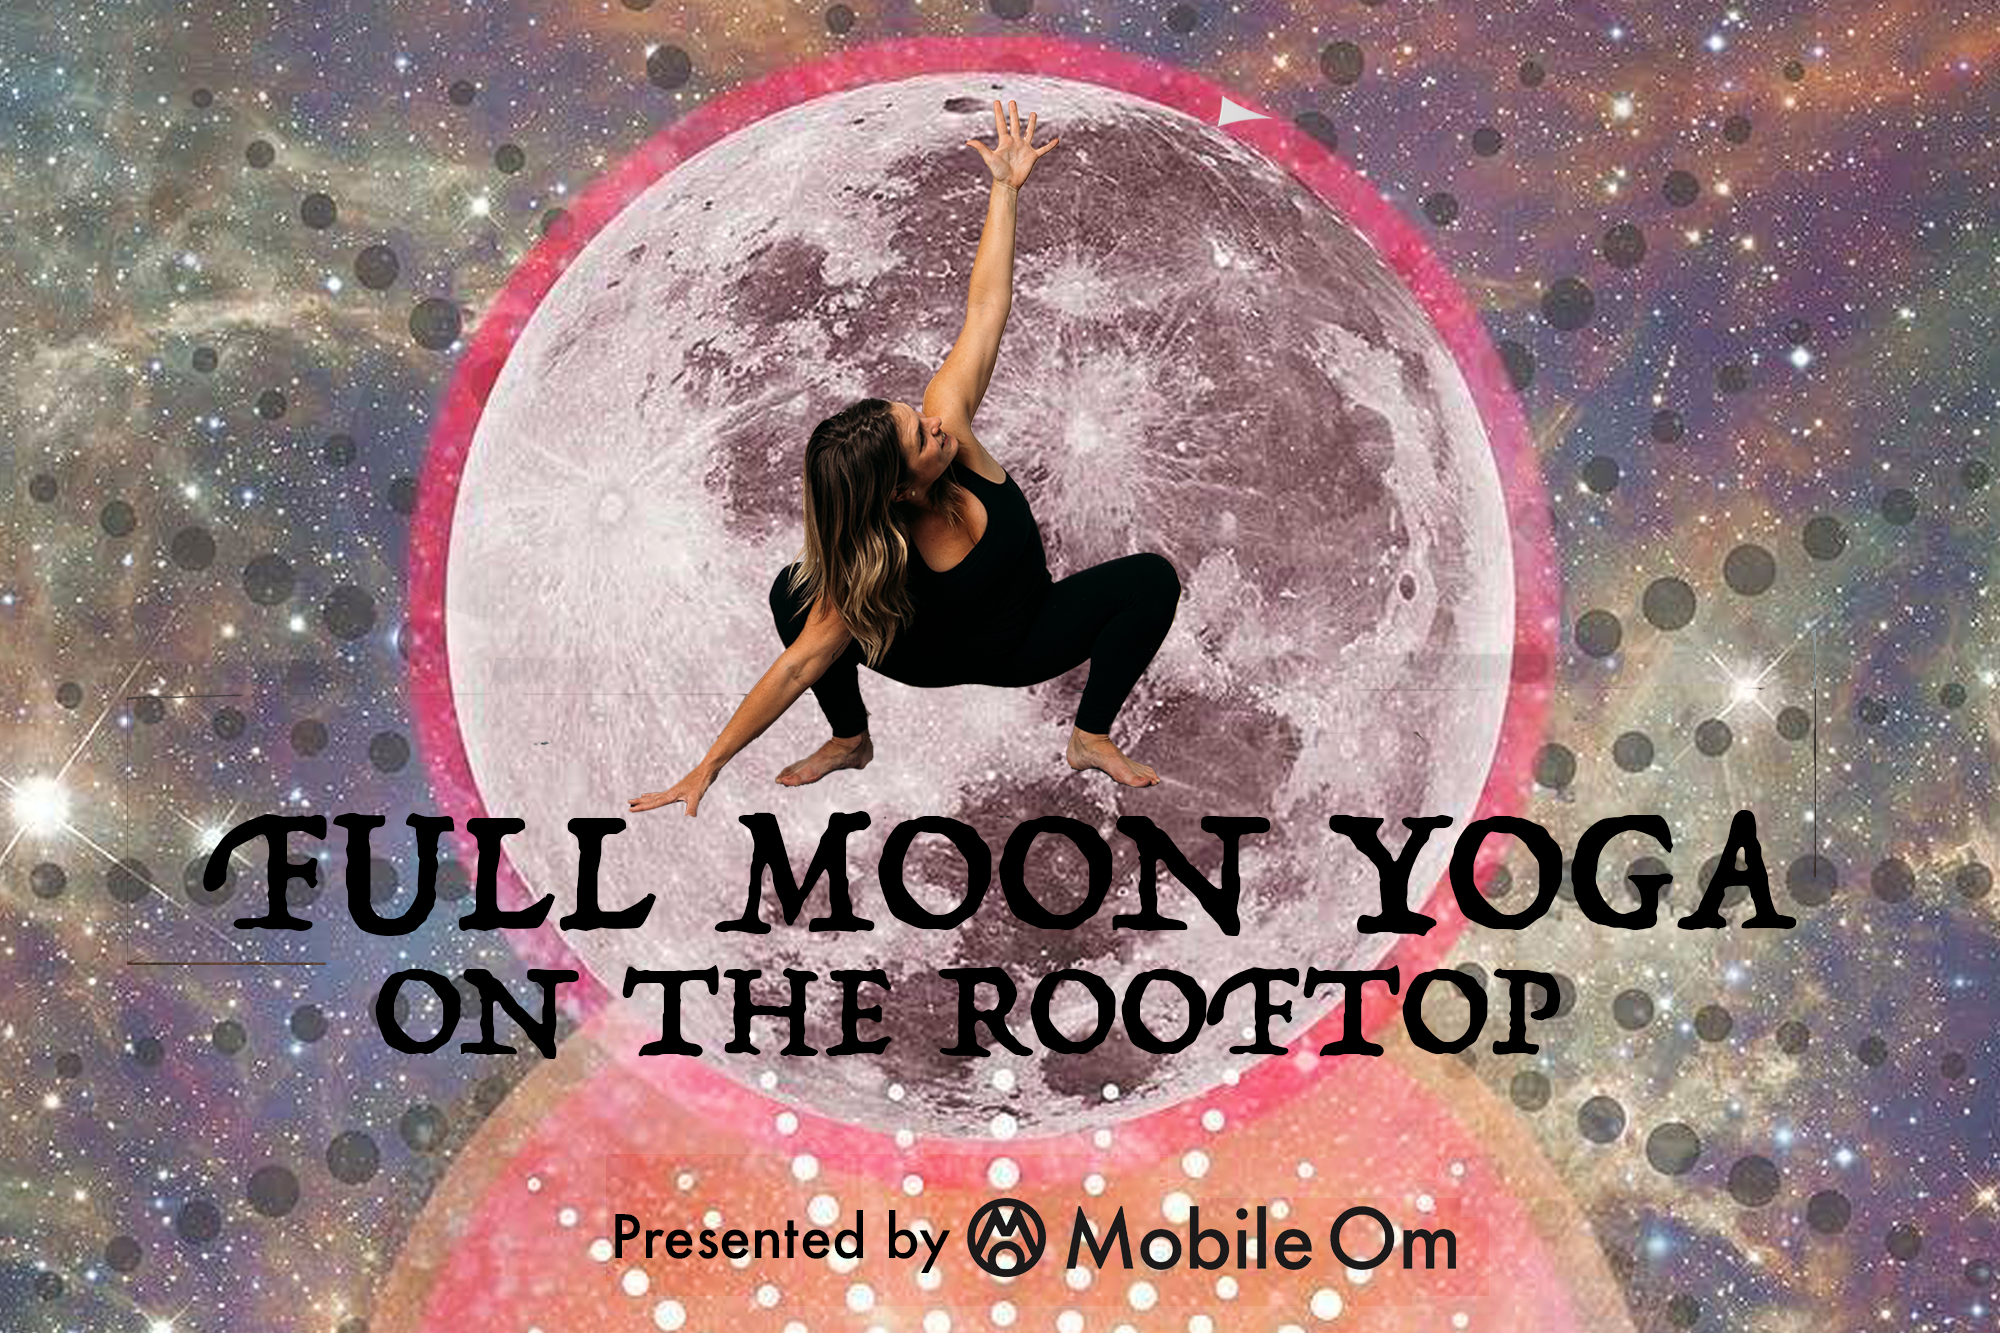 Full Moon Yoga on the Rooftop